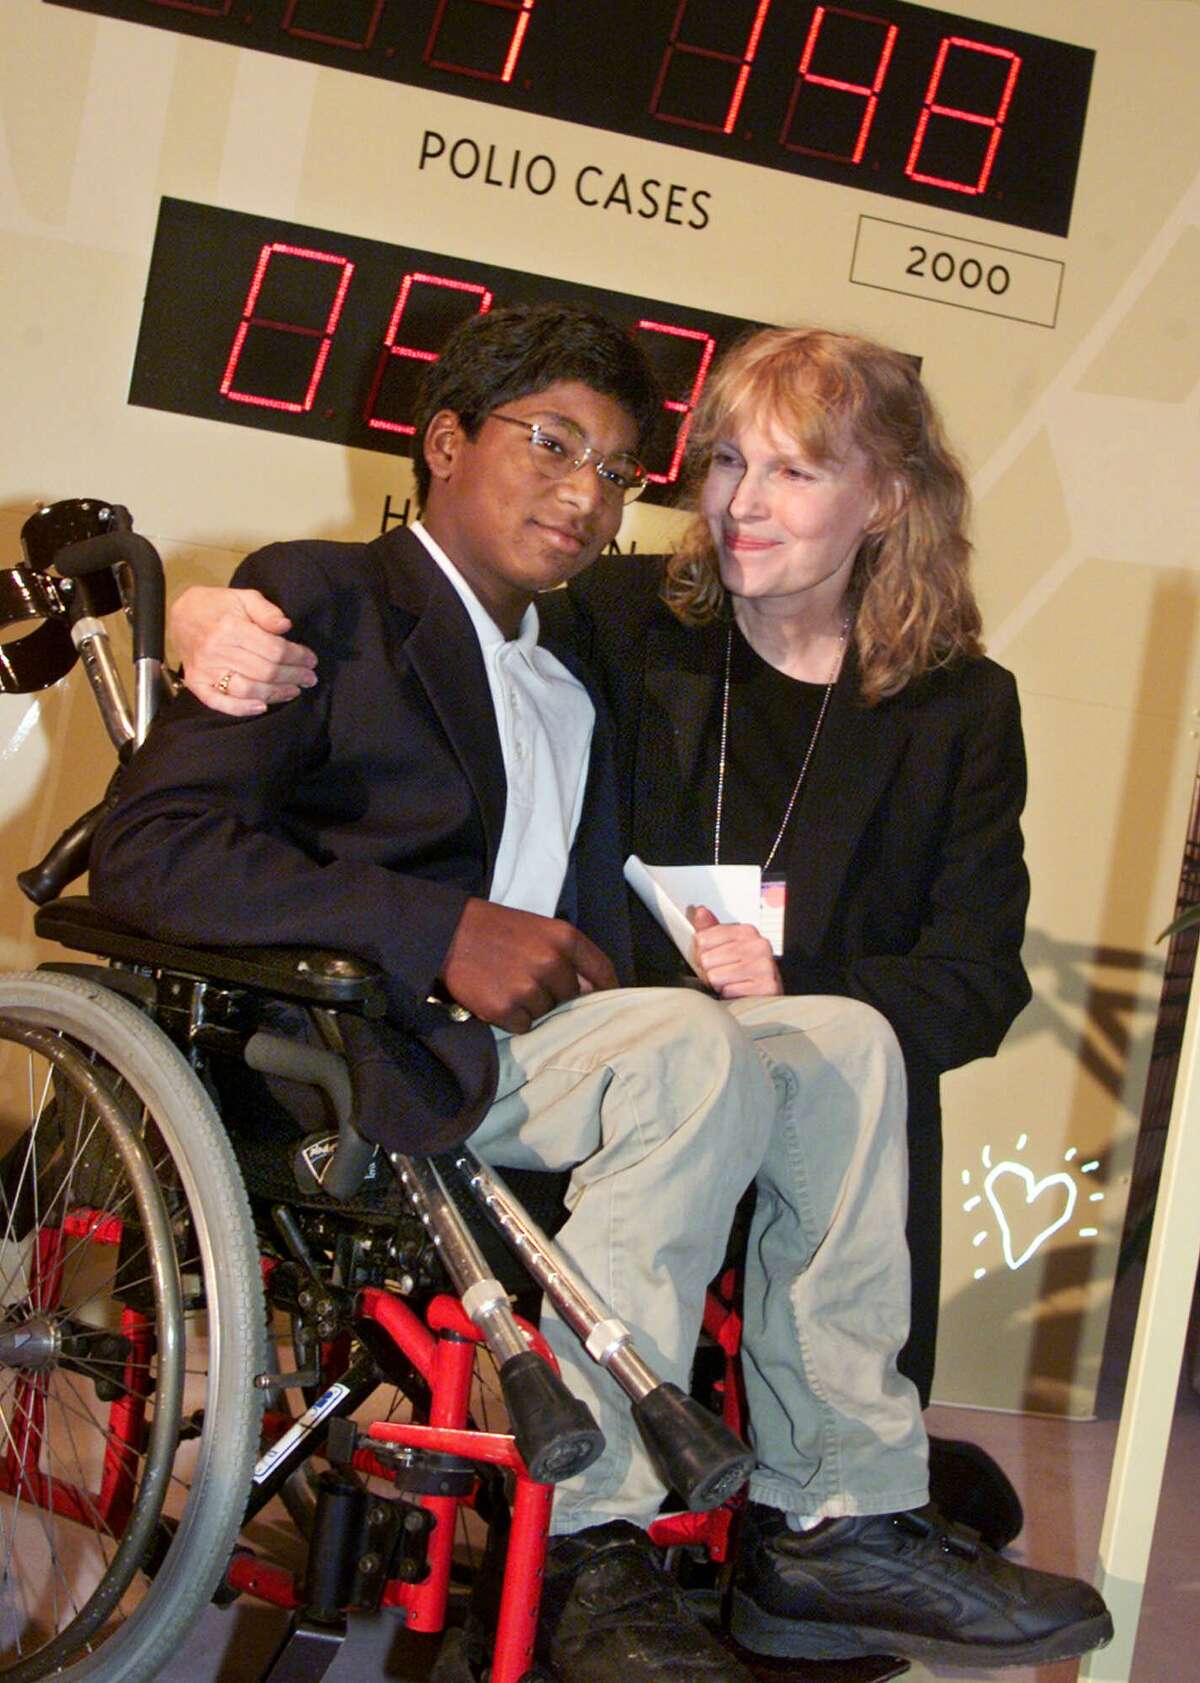 Actress Mia Farrow puts her arm around her adopted son Thaddeus as they participate in the global summit on polio eradication Wednesday, Sept. 27, 2000, at United Nations headquarters. Farrow, who suffered from the disease as a child, and her 12-year-old son who is paralyzed by it, joined U.N. Secretary General Kofi Annan in starting a clock to countdown the number of polio cases until 2005. (AP Photo/Richard Drew)